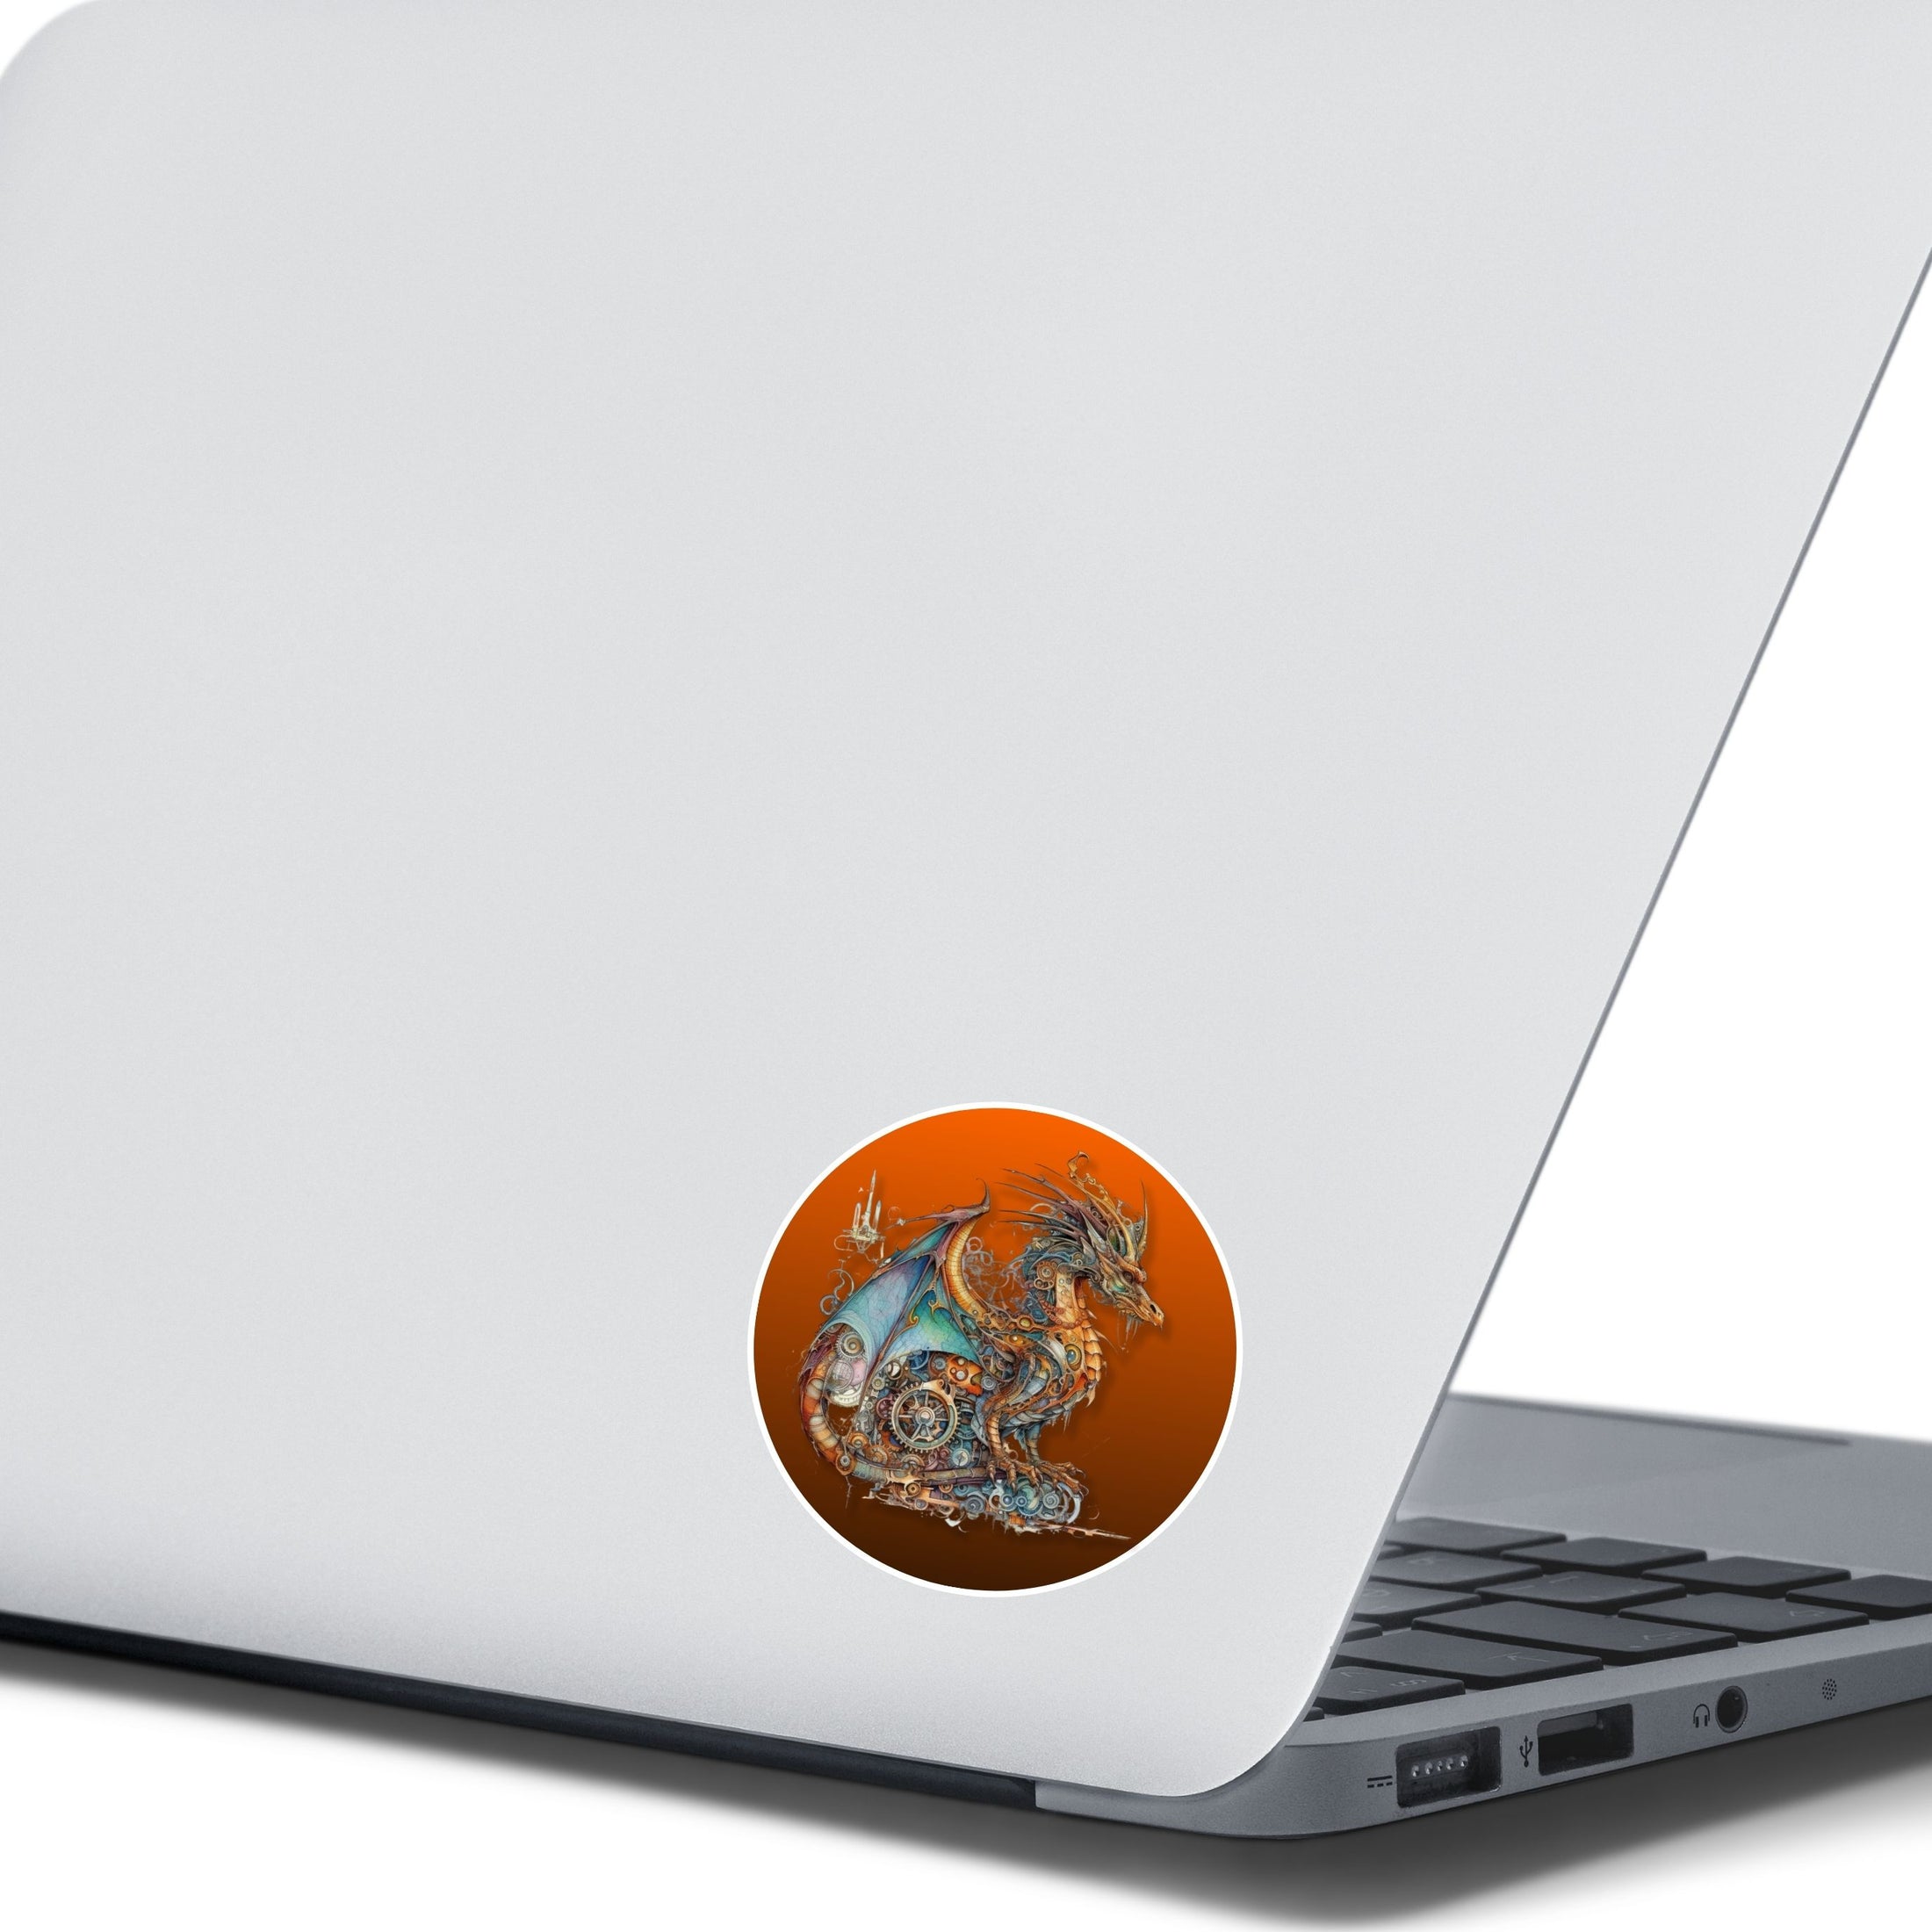 This image shows the steampunk dragon with copper background on the back of an open laptop.